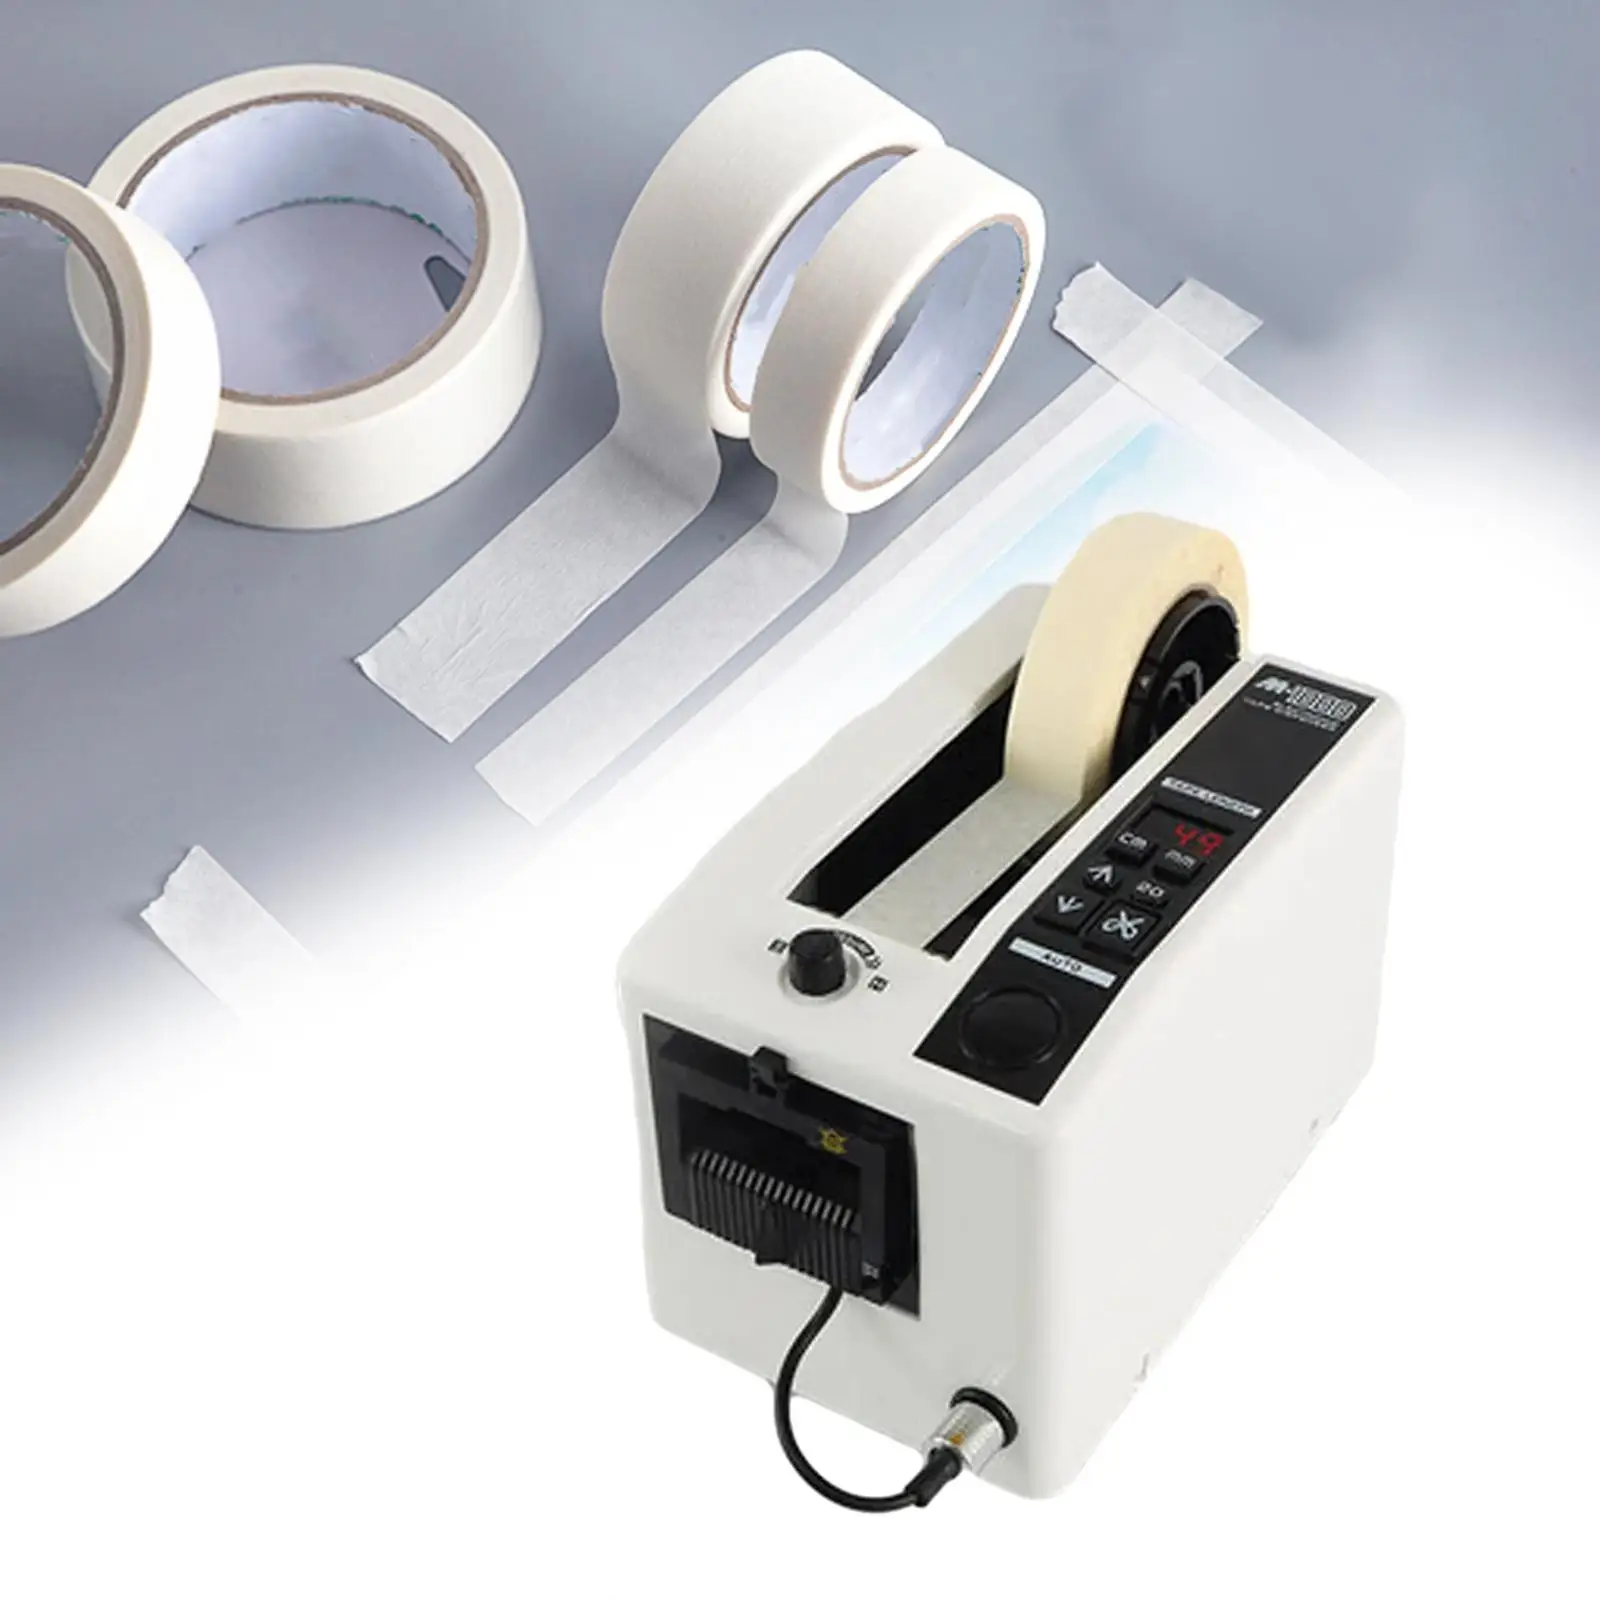 Automatic Tape Dispenser Max Length up to 39inch Tape Cutter for 6-50mm Width Tapes Scotch Tape Commercial or Personal Use